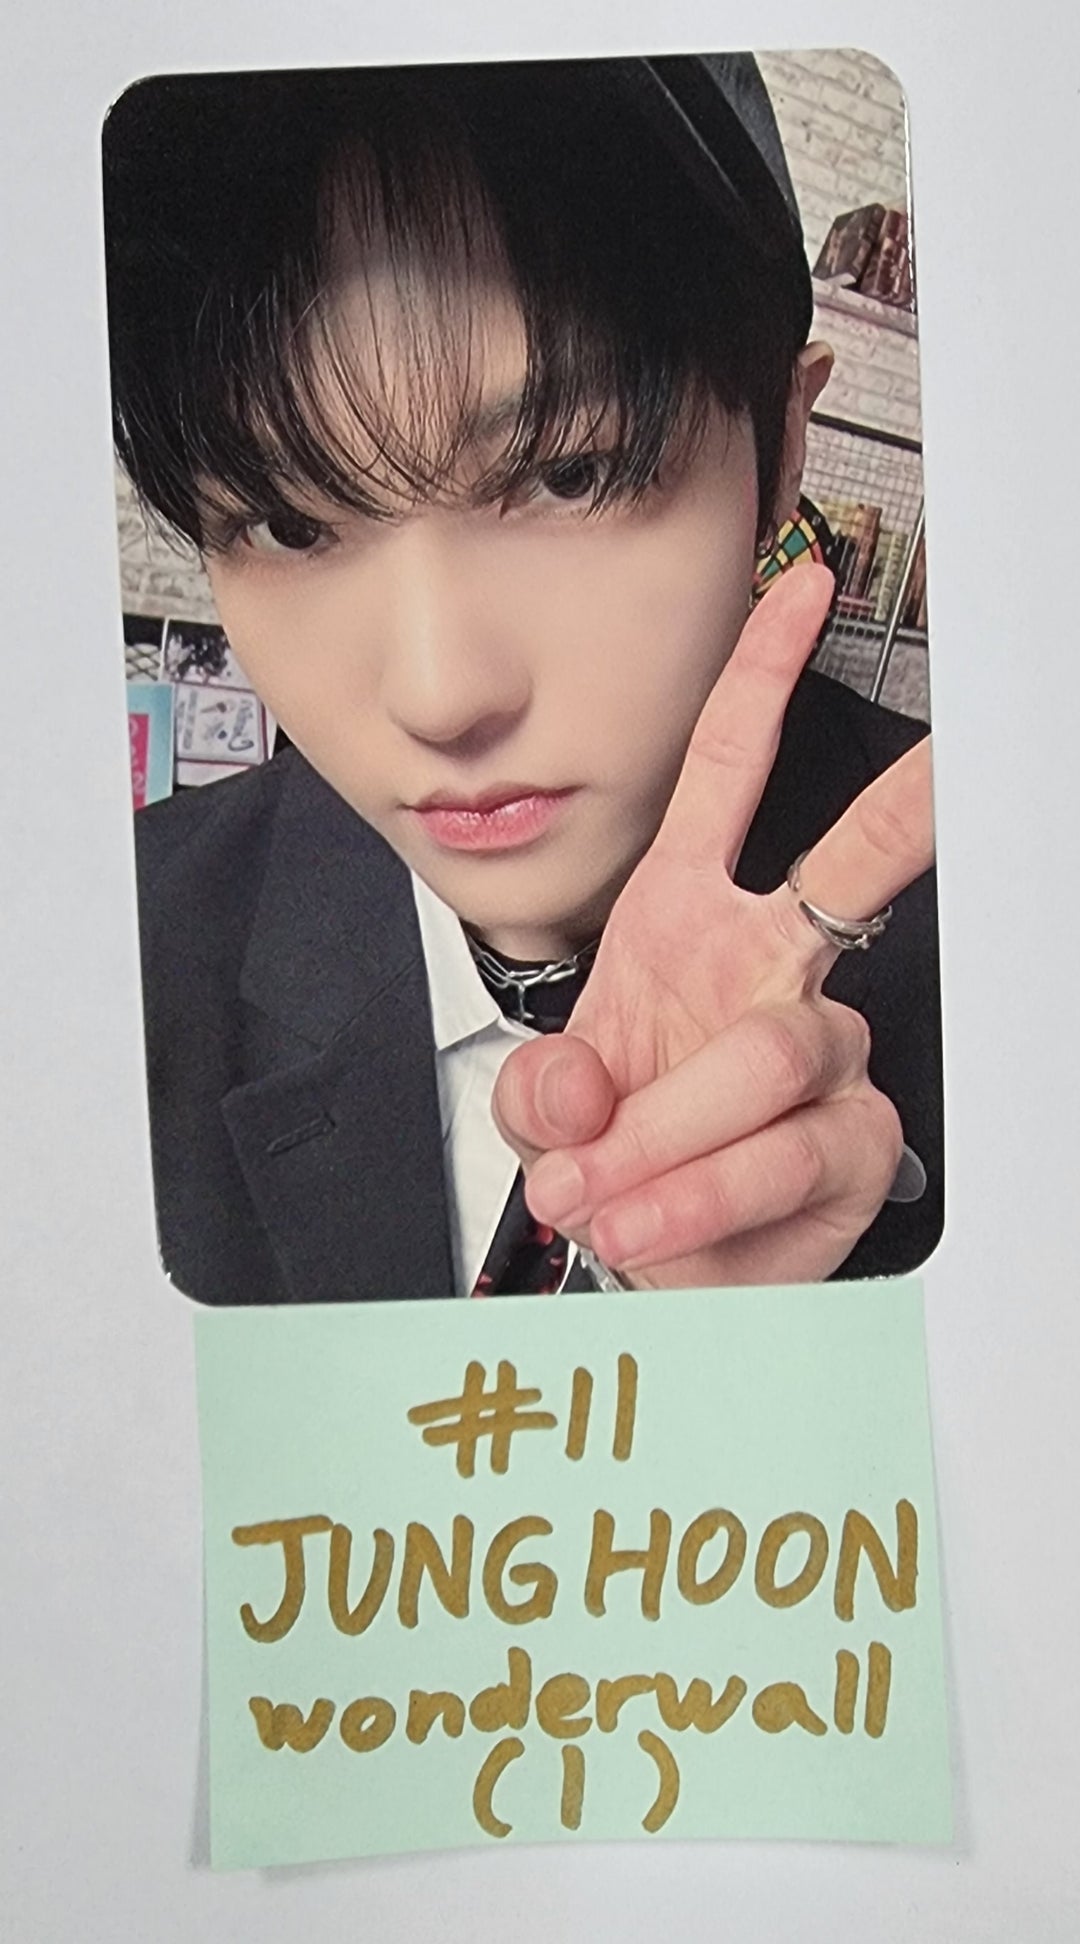 Xikers "HOUSE OF TRICKY : Doorbell Ringing" - Wonderwall Fansign Event Photocard